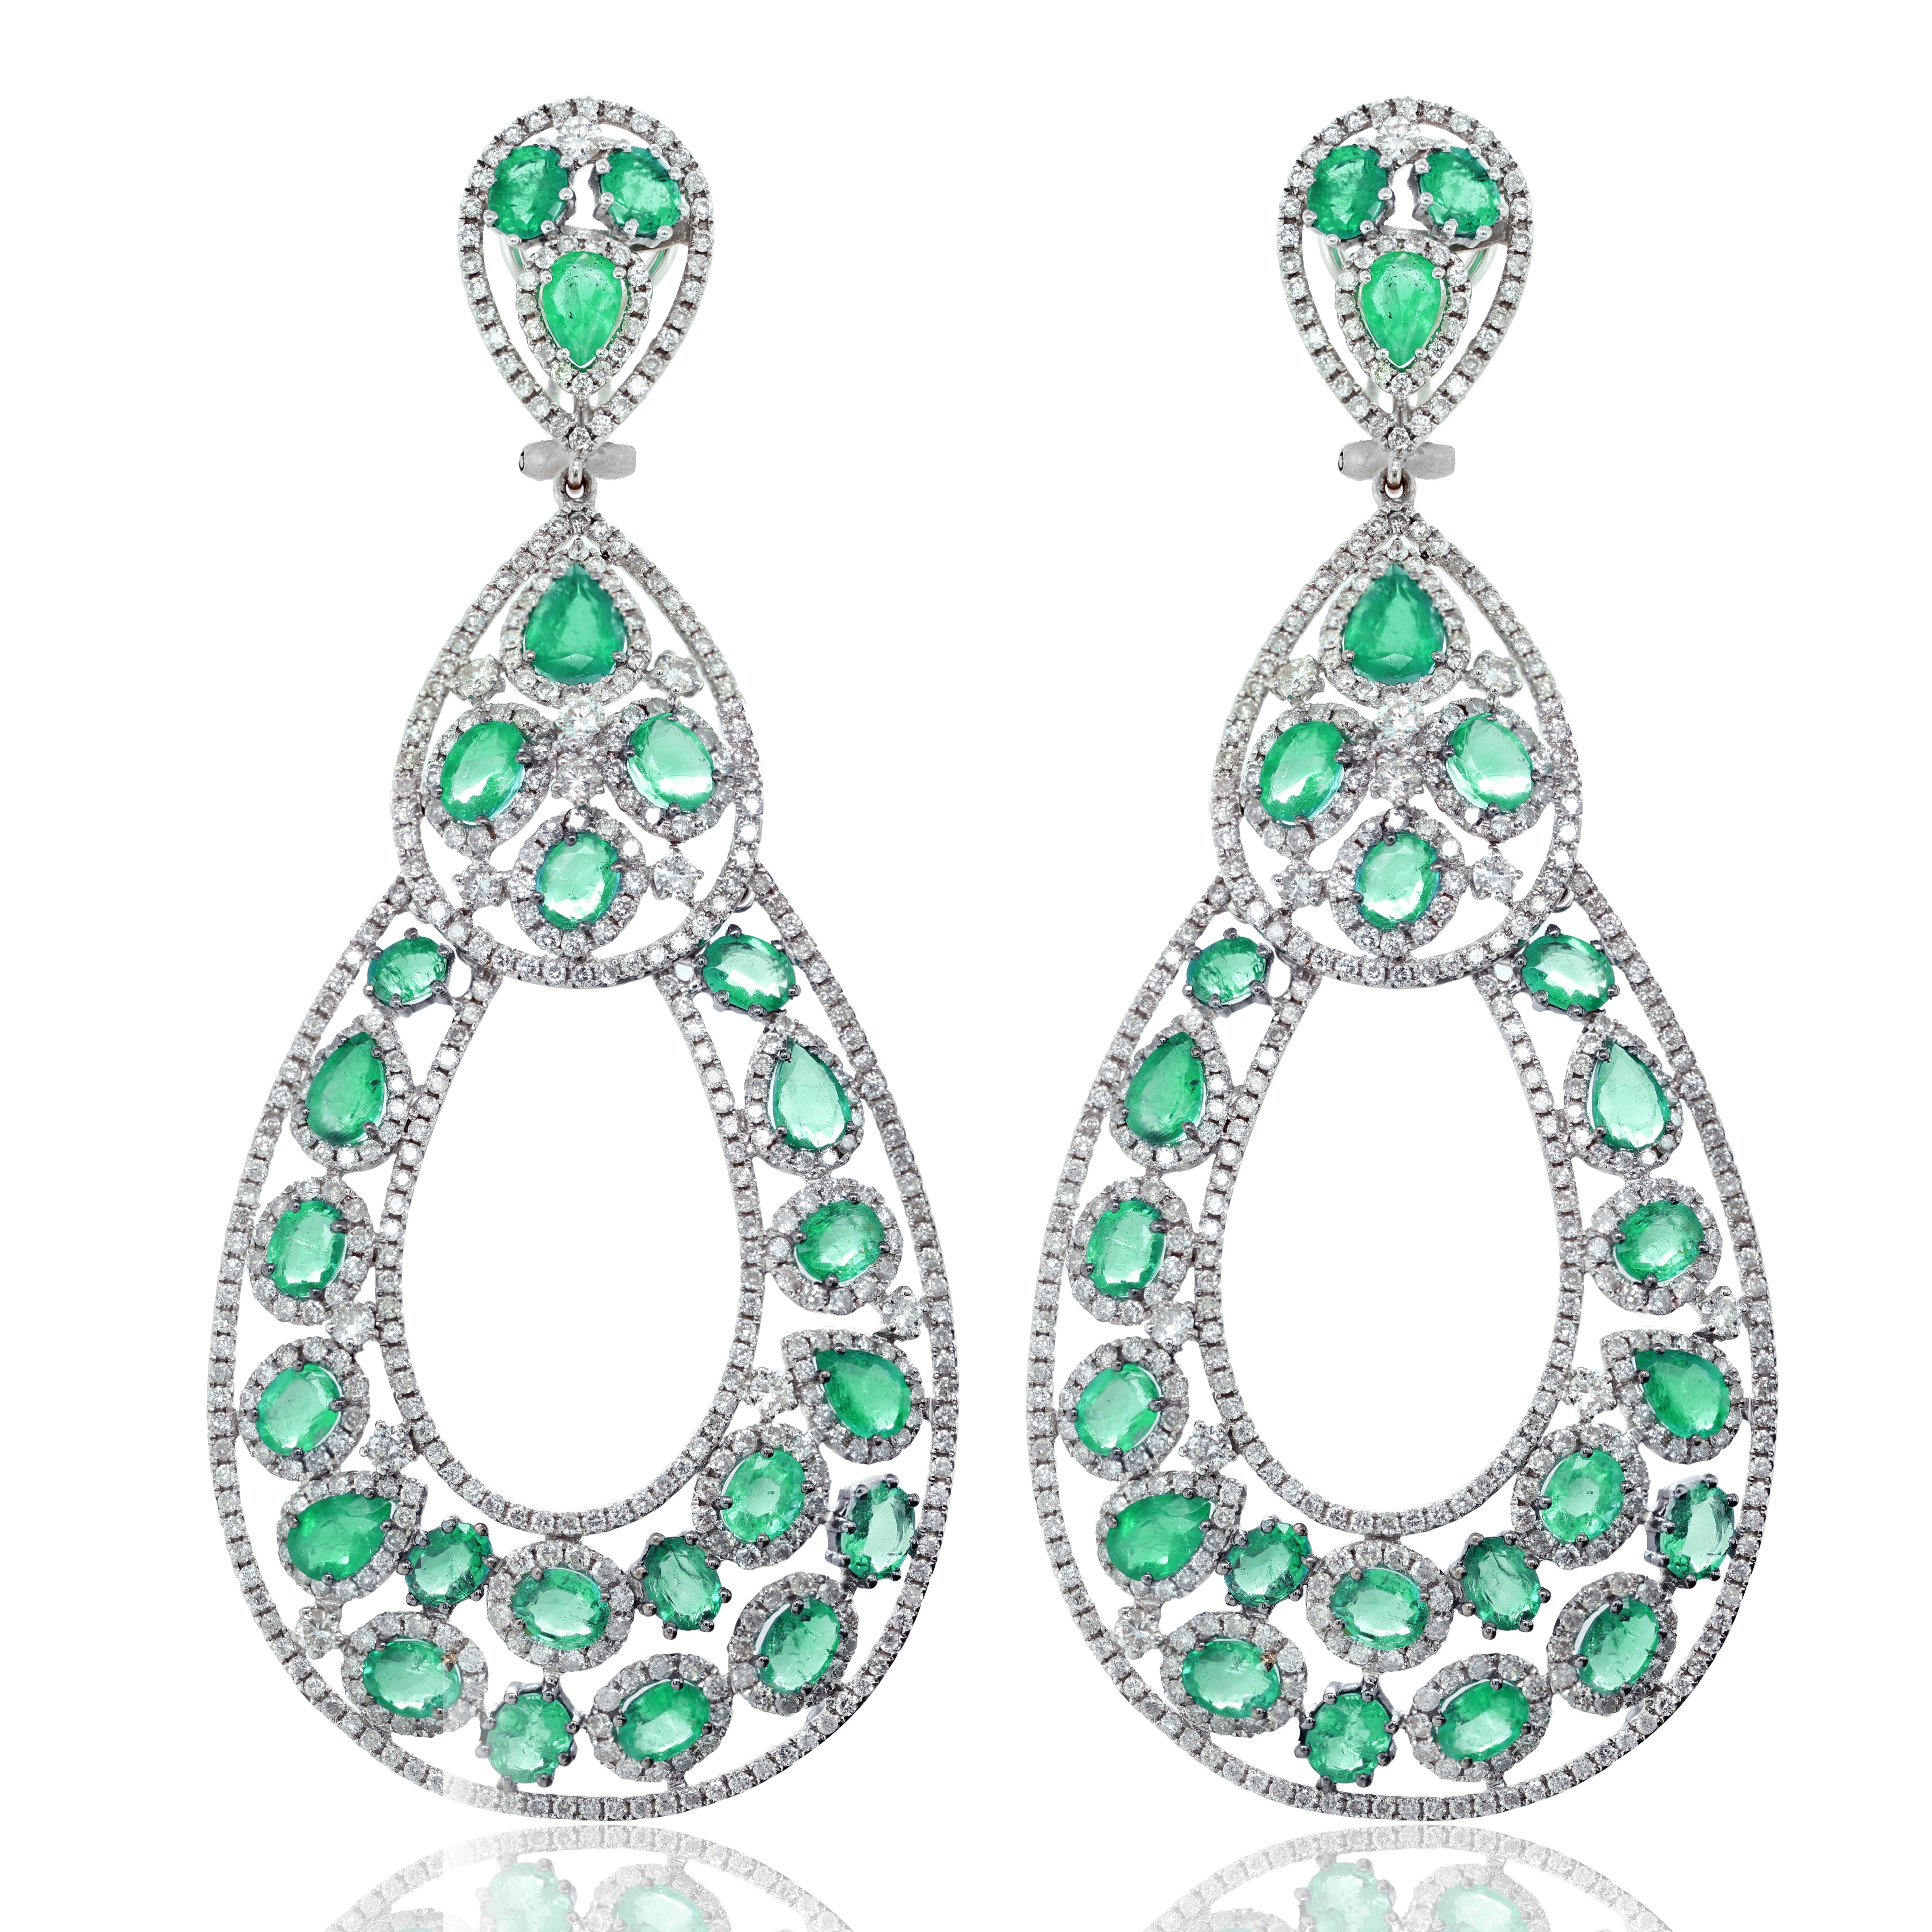 18k white gold diamond and emerald fashion earrings features 9.50 carats of diamonds and 18.40 carats of green emeralds